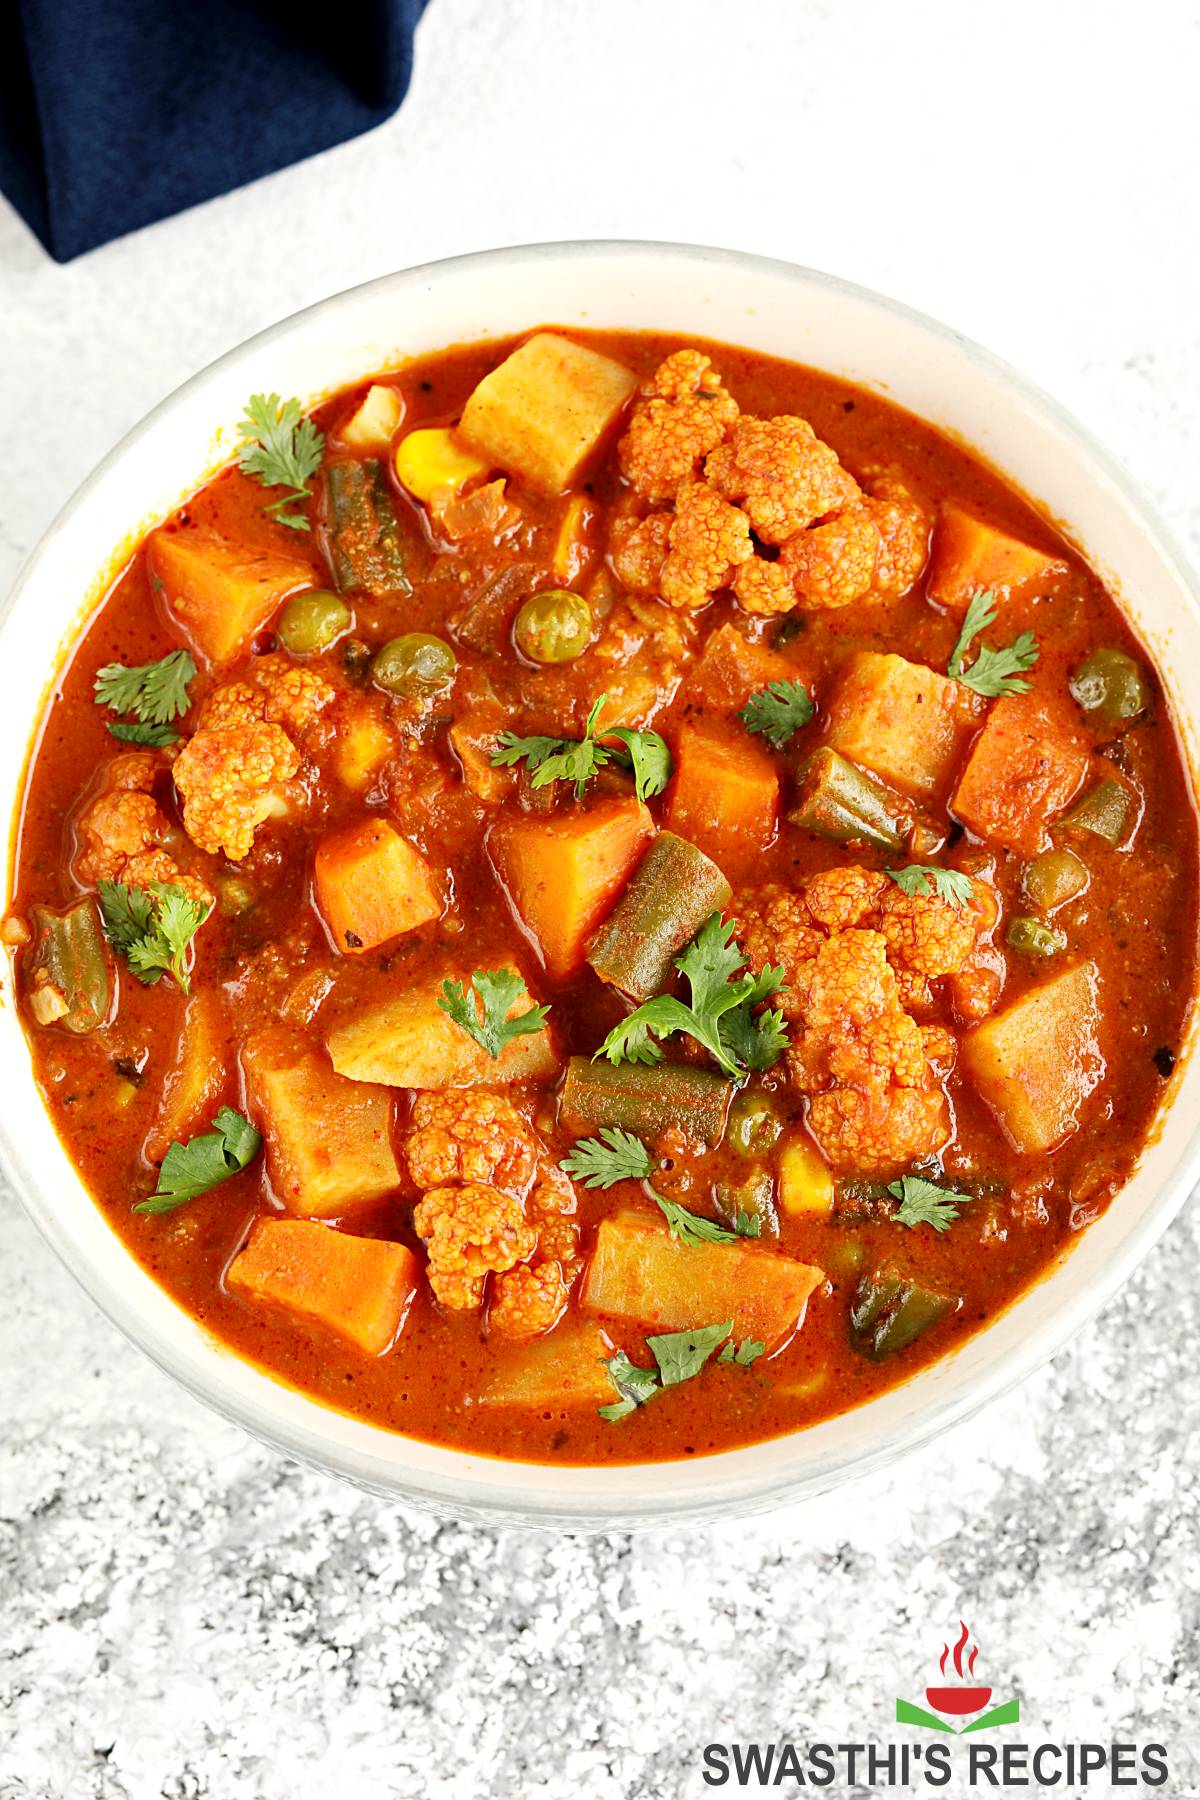 Vegetable Curry Recipe - Swasthi's Recipes